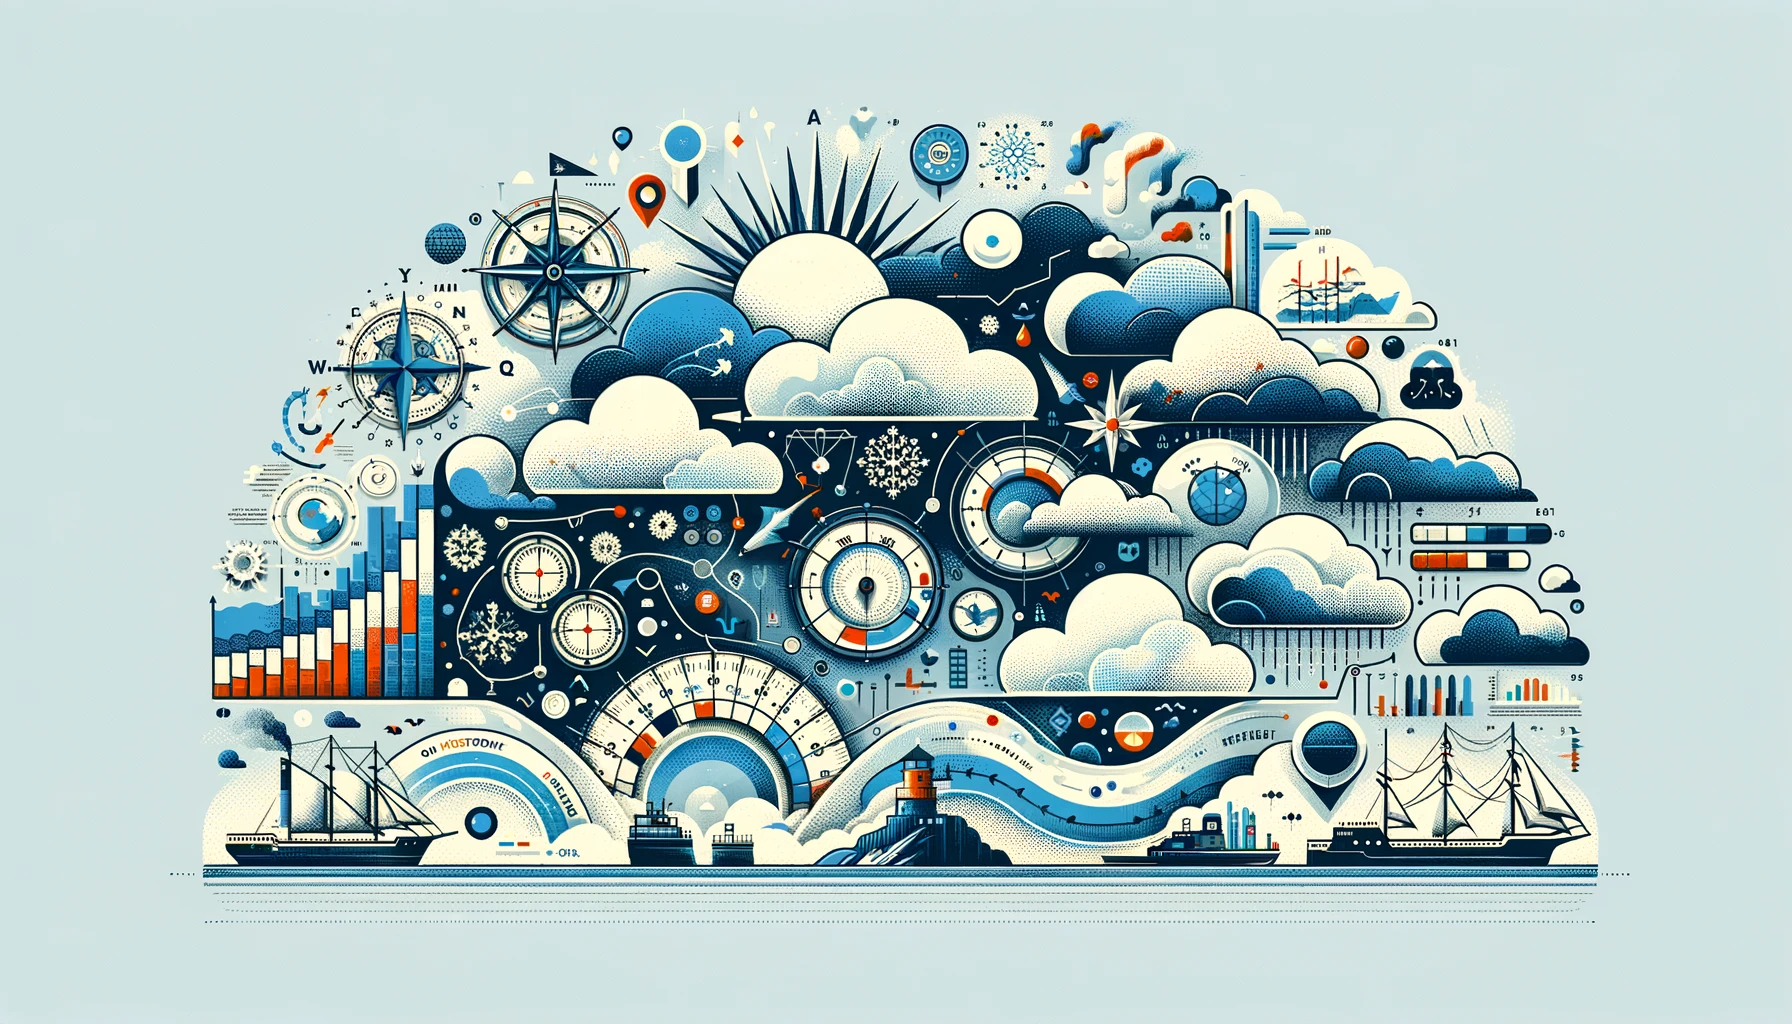 An intricate banner illustrating the convergence of meteorology and data analysis, featuring stylized weather symbols such as clouds, rain, and the sun, interwoven with vintage navigational tools, charts, and graphs against a palette of Weatherstack's blues, whites, and red accents, highlighting the significance of historical weather data in strategic planning and decision-making.